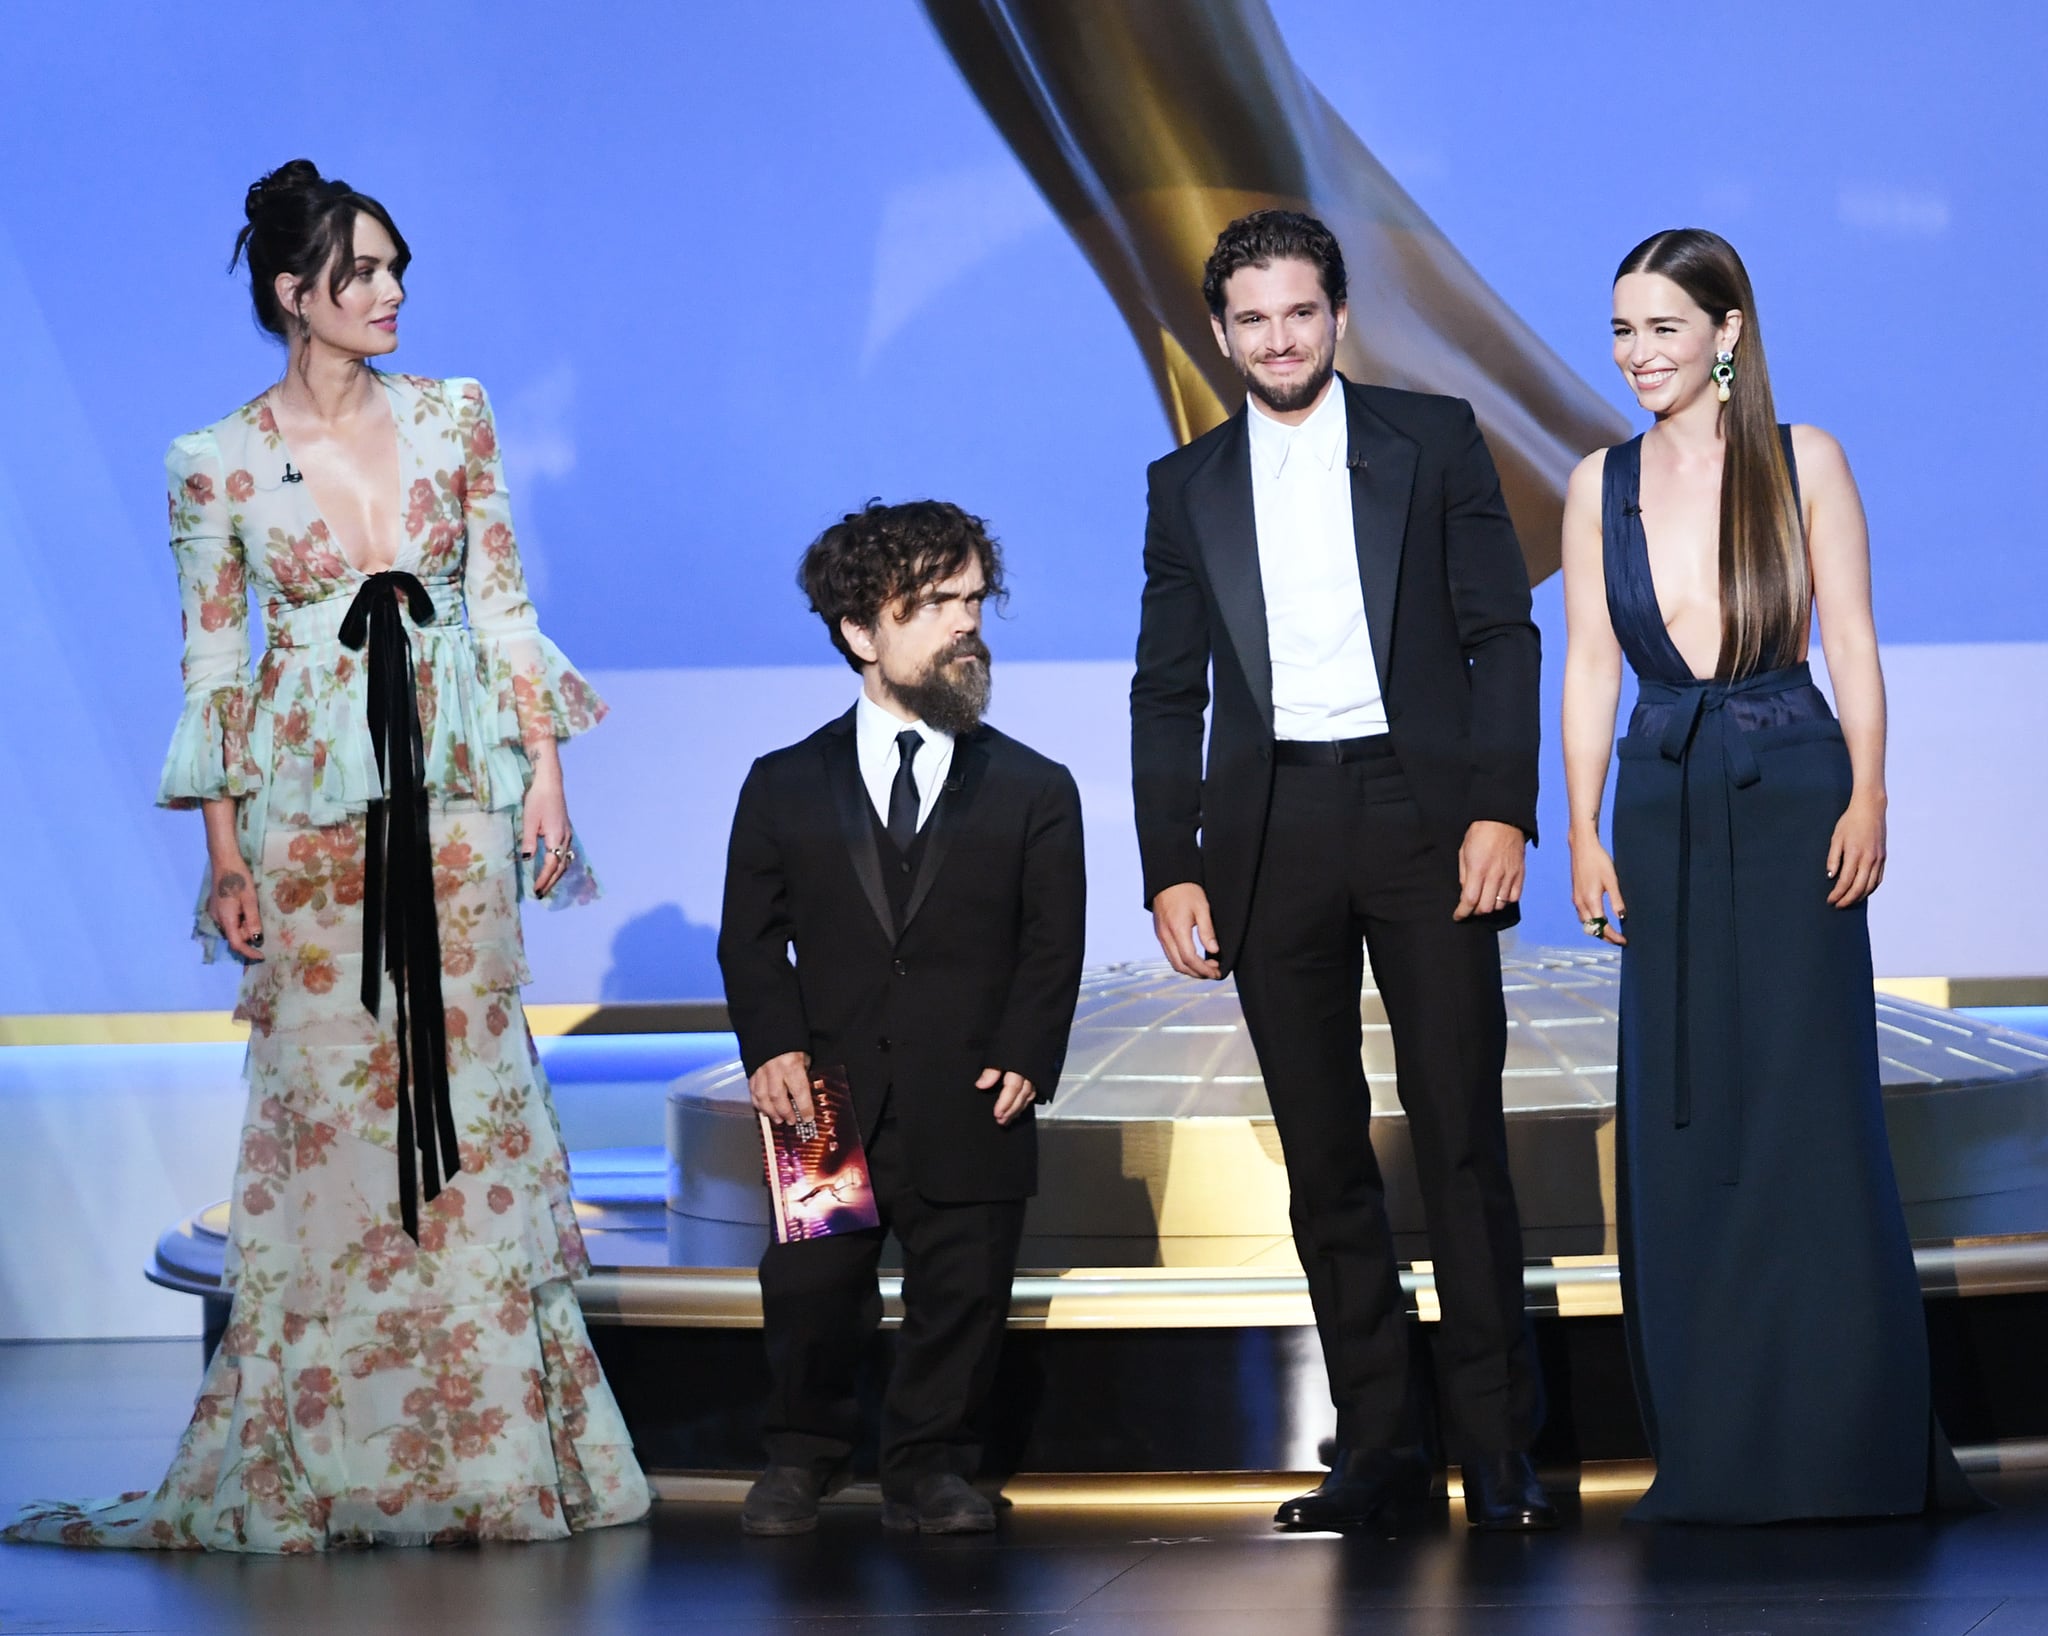 Lena Headey Peter Dinklage Kit Harington And Emilia Clarke At The 2019 Emmys Pictures Of The Game Of Thrones Cast At The Emmys 2019 Popsugar Entertainment Uk Photo 68